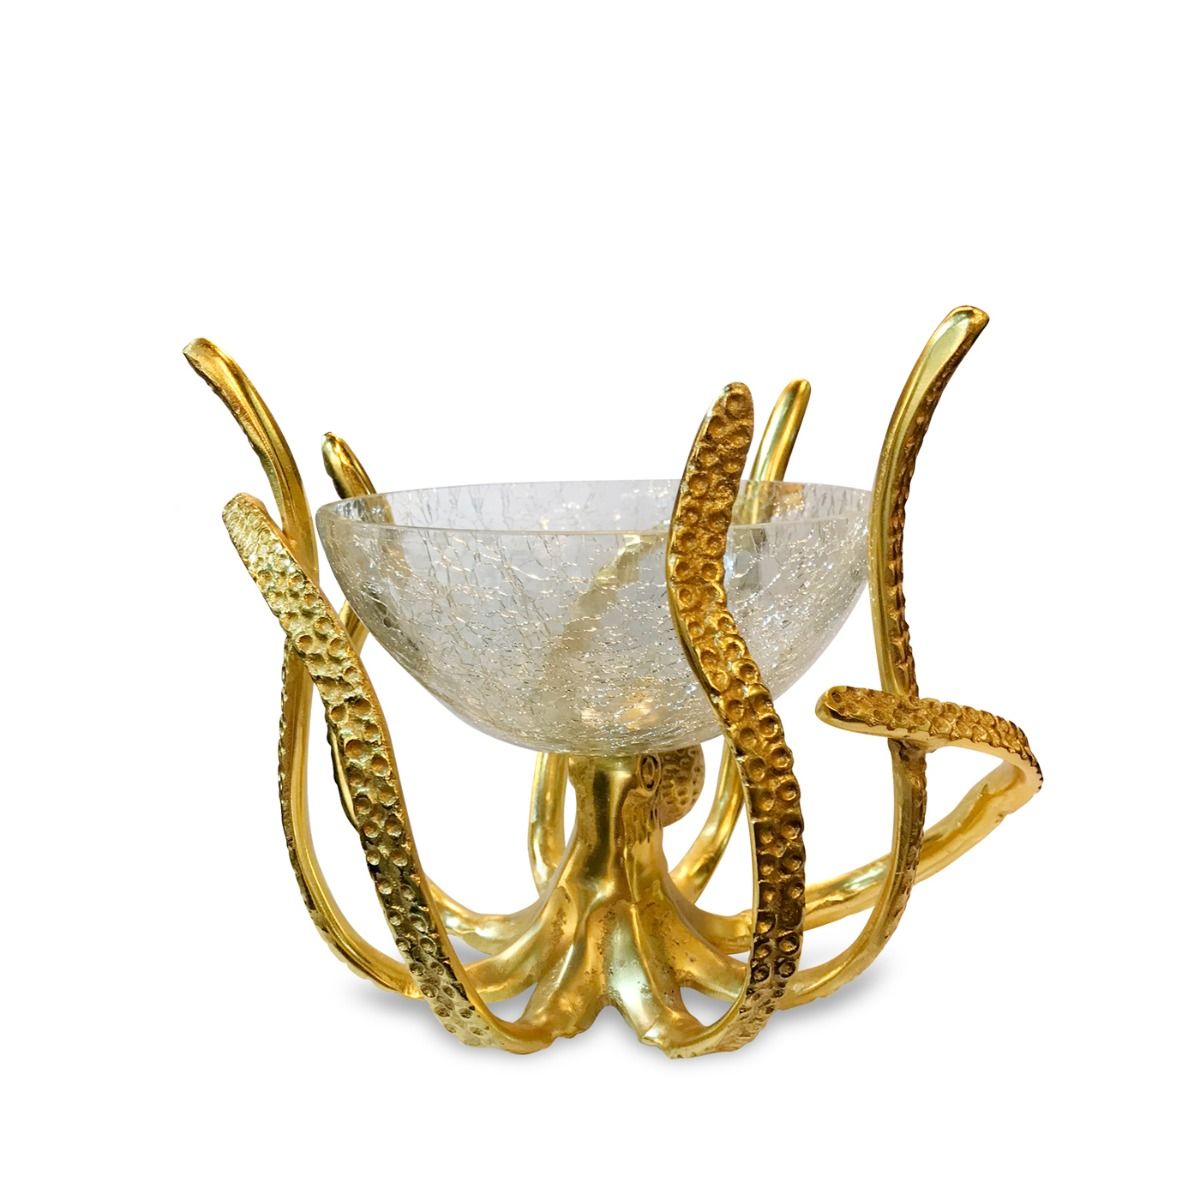 Culinary Concepts London. Gold Mini Octopus Stand & Crackle Glass Bowl - TheArtistsQuarter